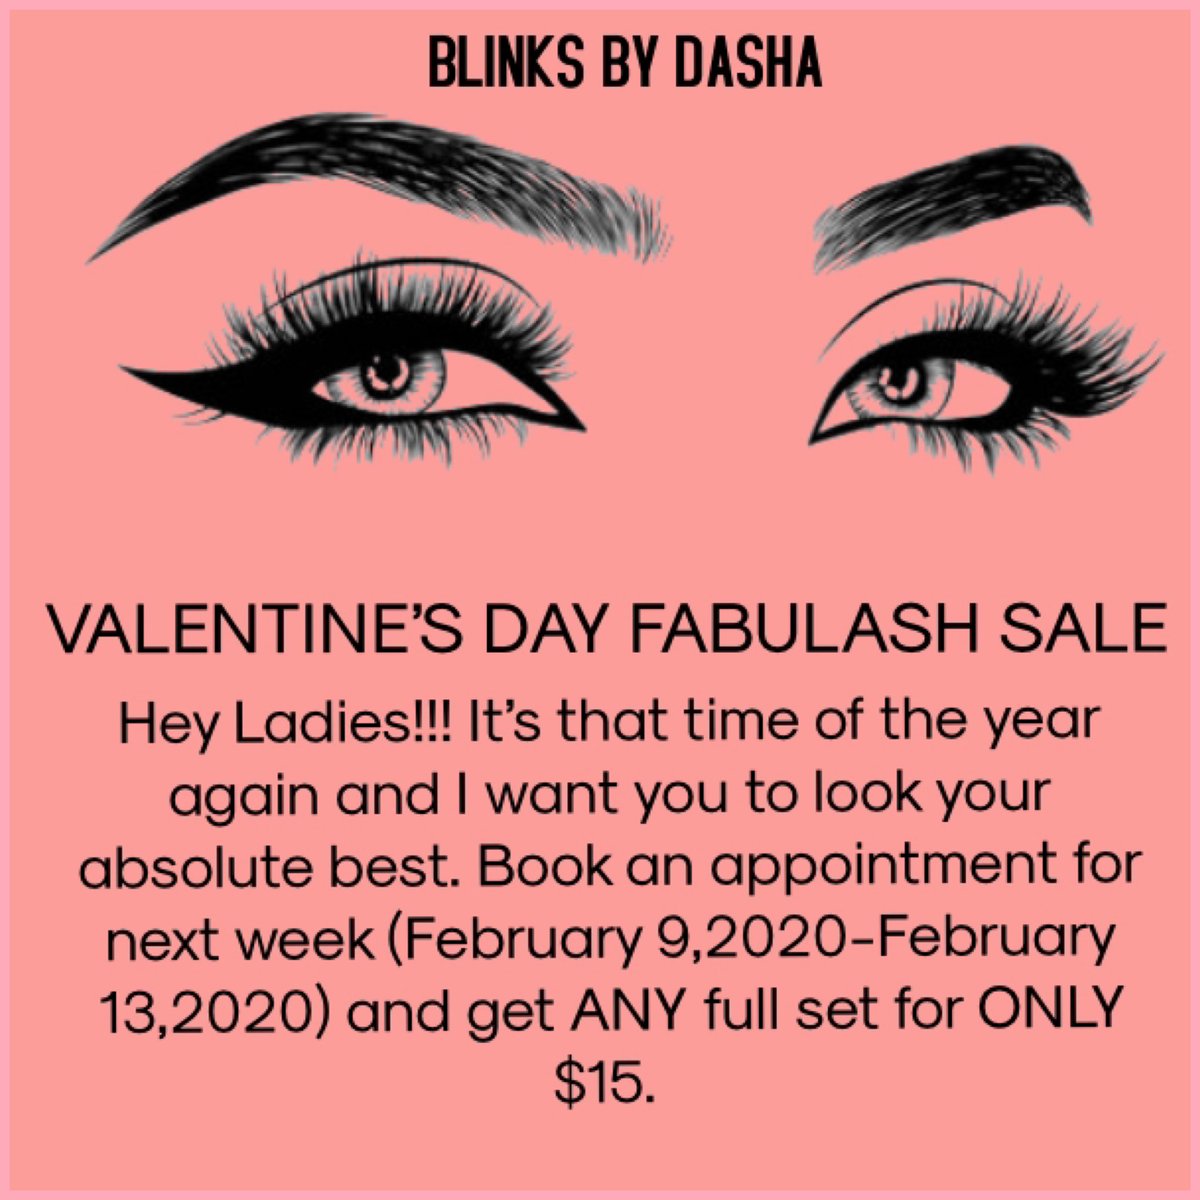 🚨 VALENTINE’S DAY SALE 🚨 
BOOK AN APPOINTMENT FOR NEXT WEEK AND GET ANY FULL SET FOR ONLY $15. 
 #lashes #lashtech #louisianatechuniversity #gramblingstateuniversity #Lafayette #Individuallashes #clusters #makeup #beauty #affordable #gramfam #soultech #women